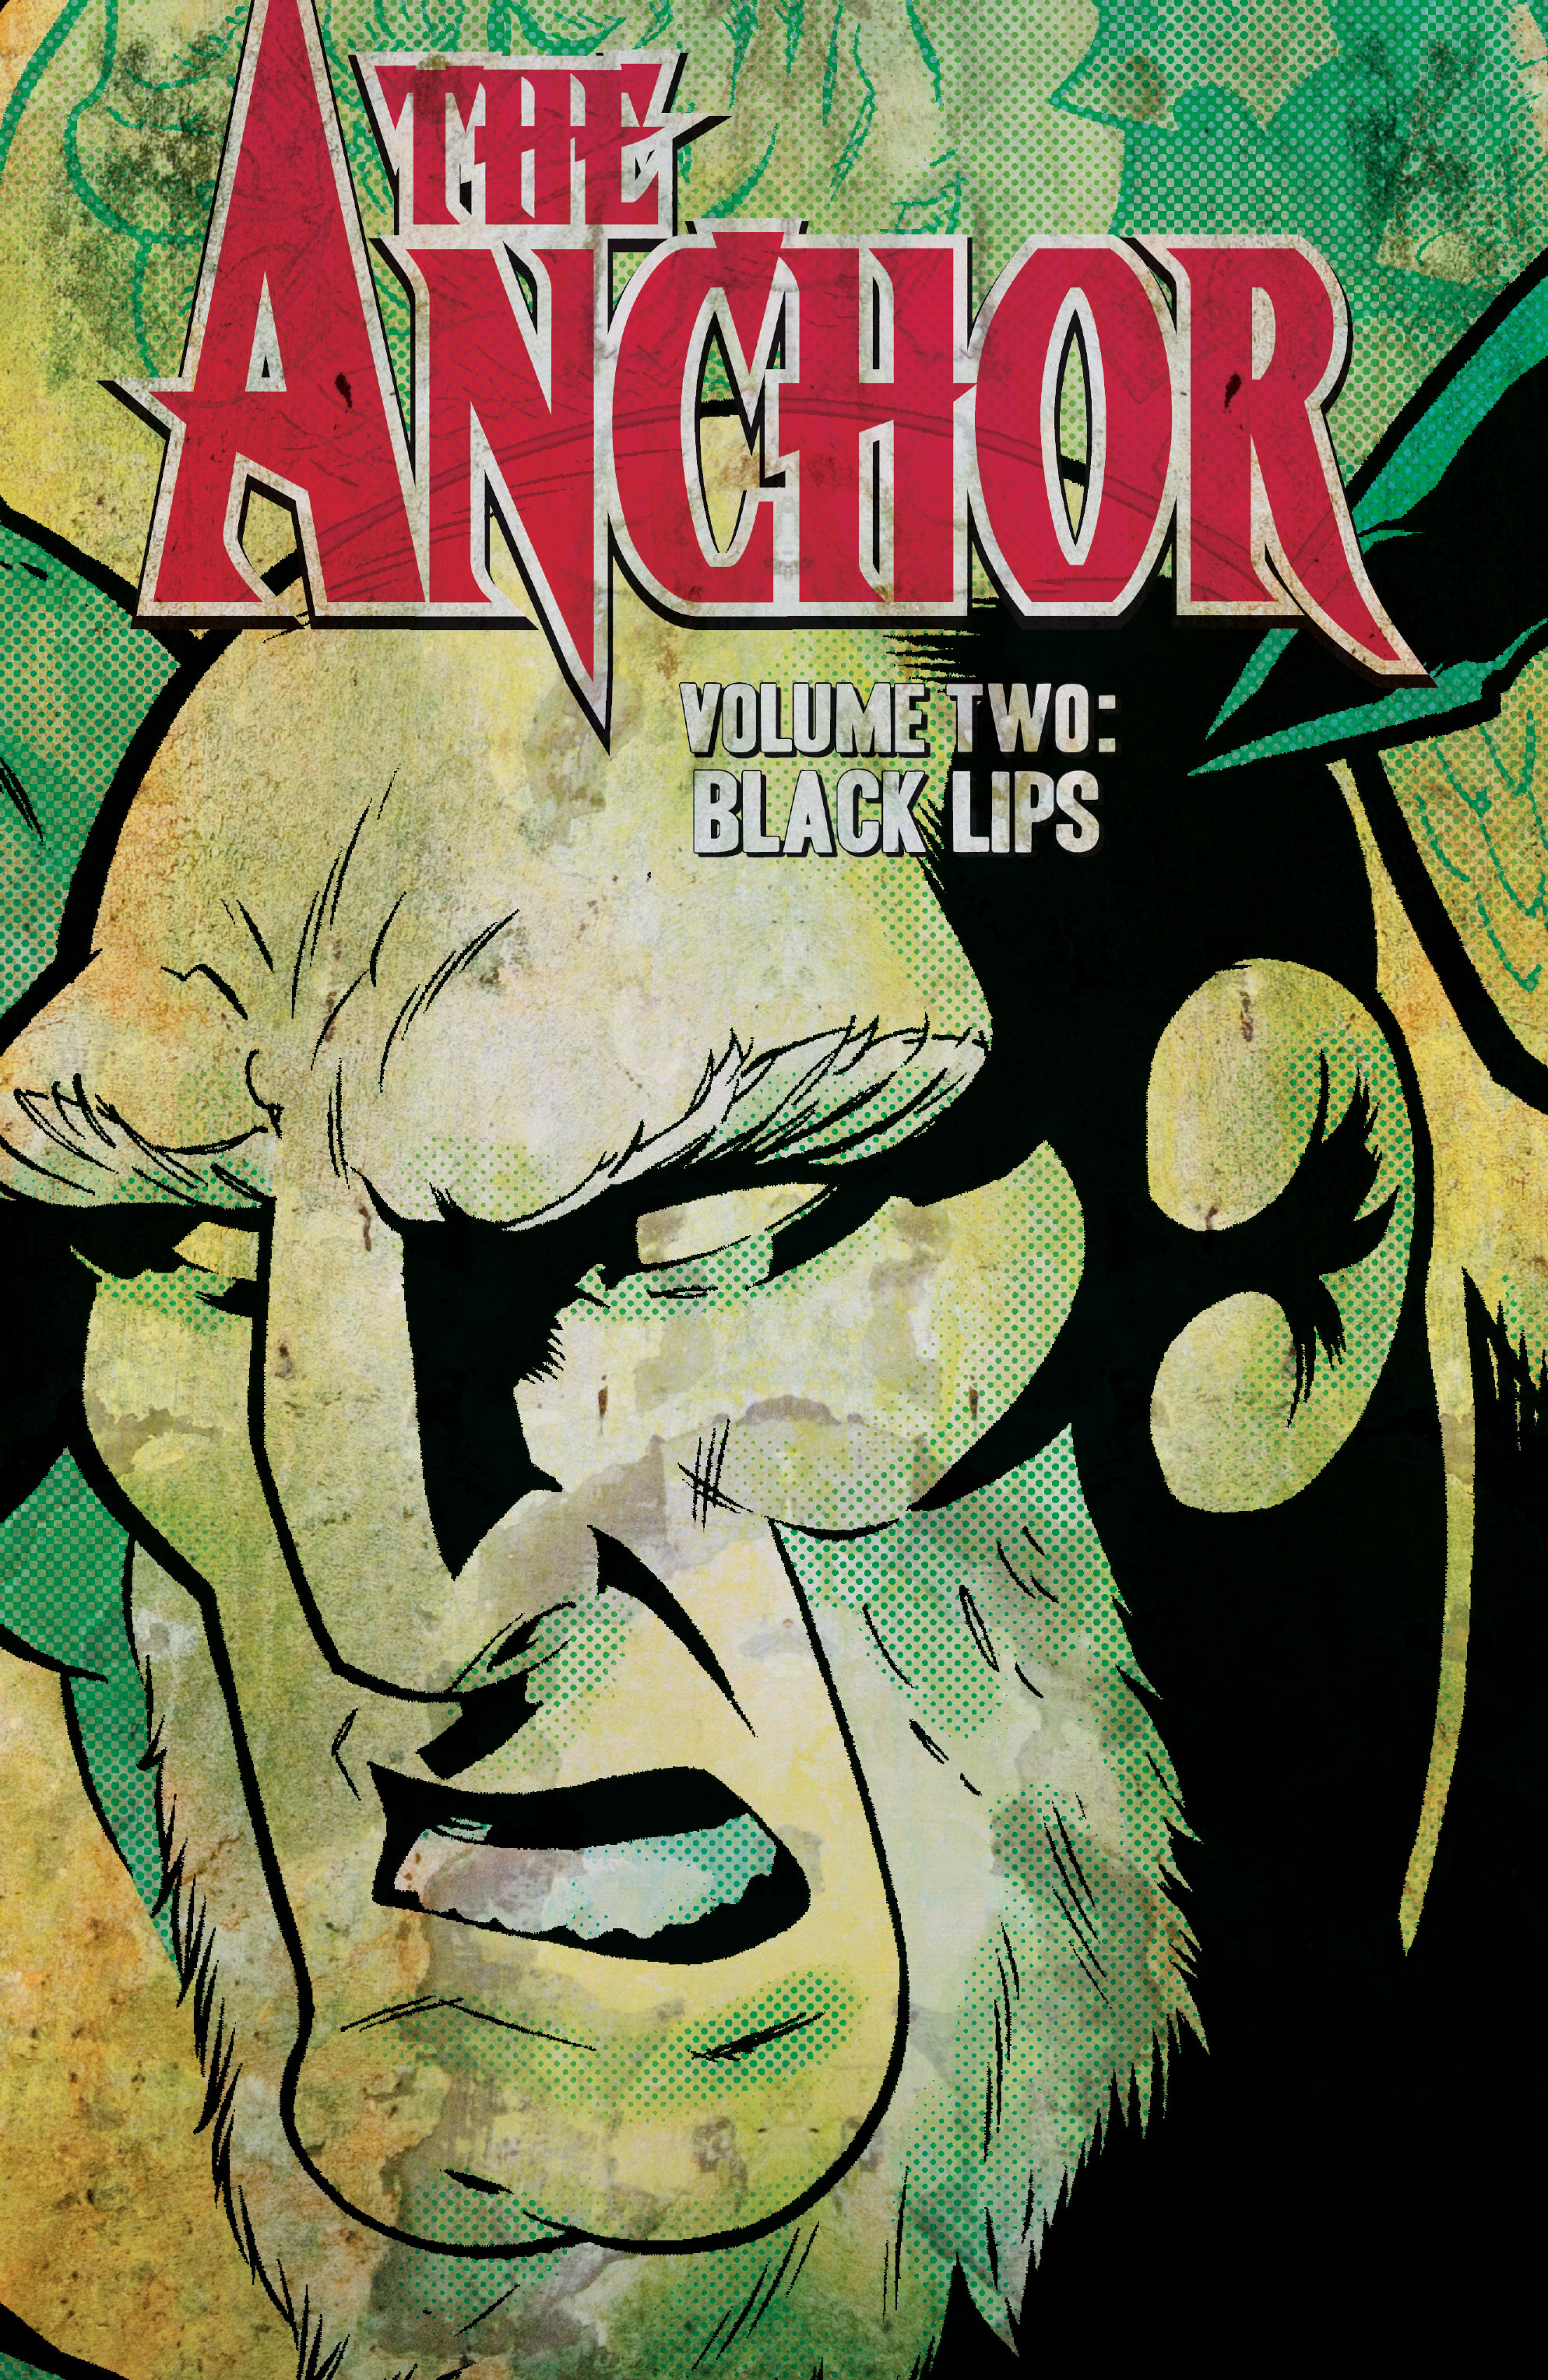 Read online The Anchor comic -  Issue # TPB 2 - 2